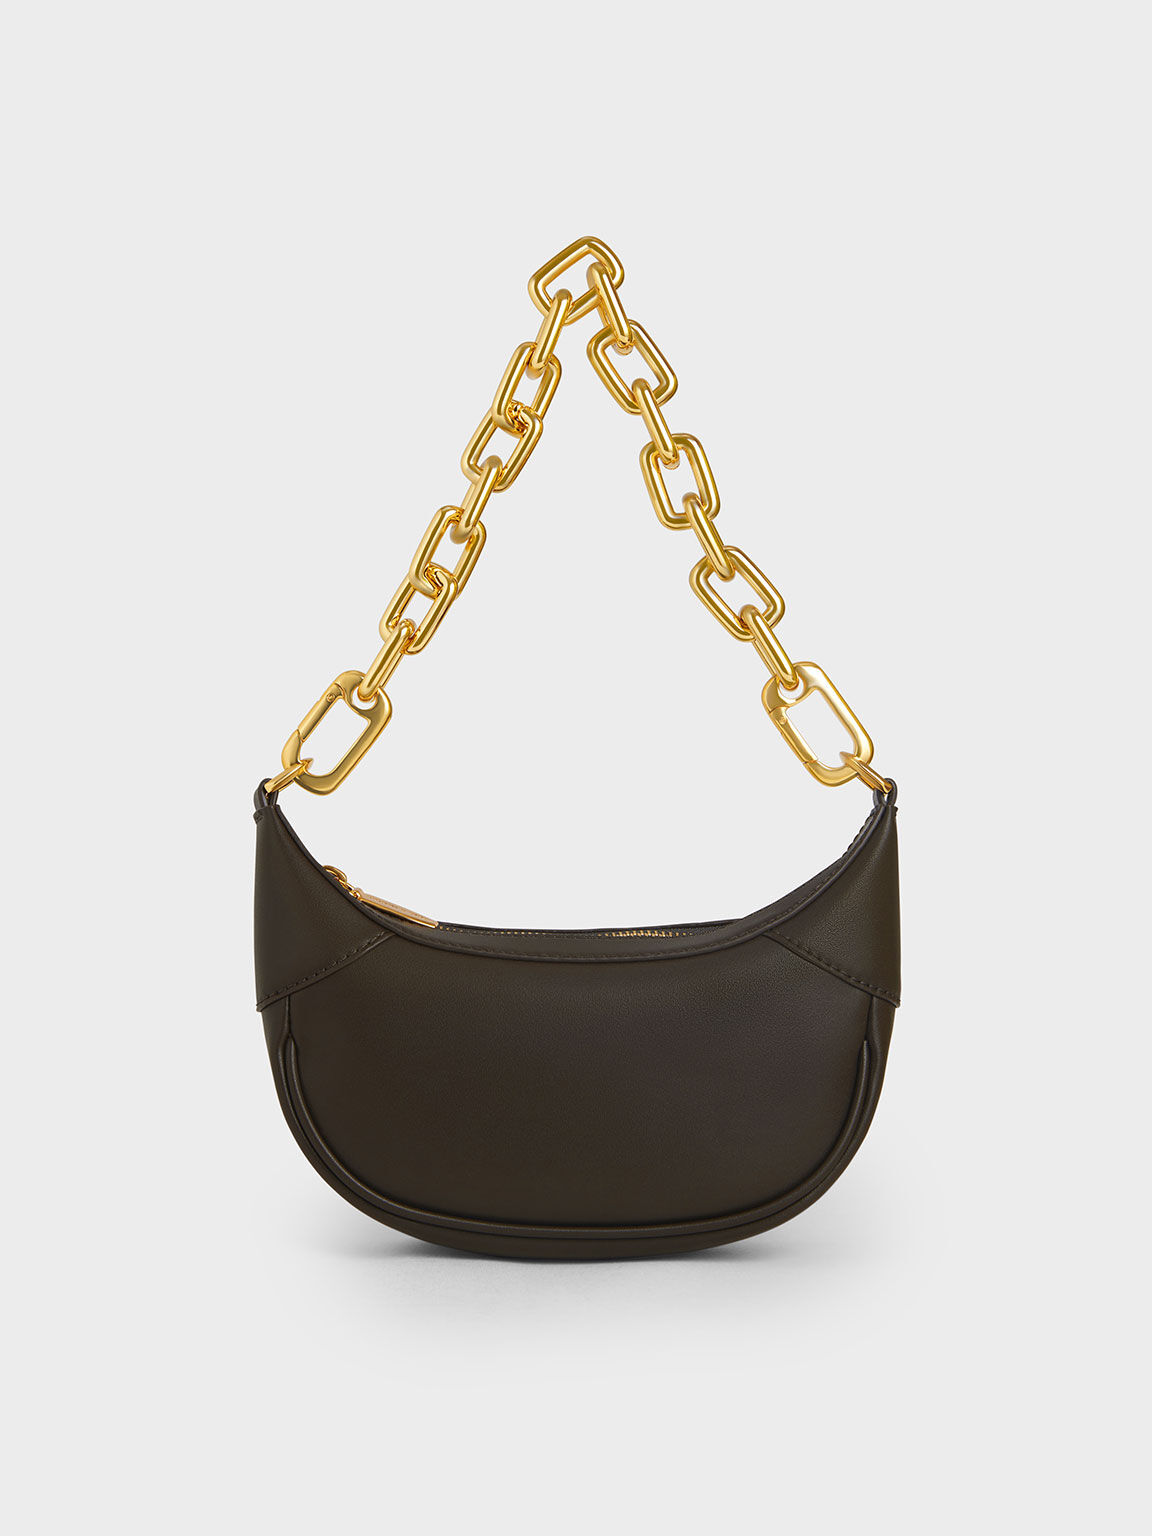 NEW ARRIVAL Charles & Keîth Double handle Chain Top Handle bag